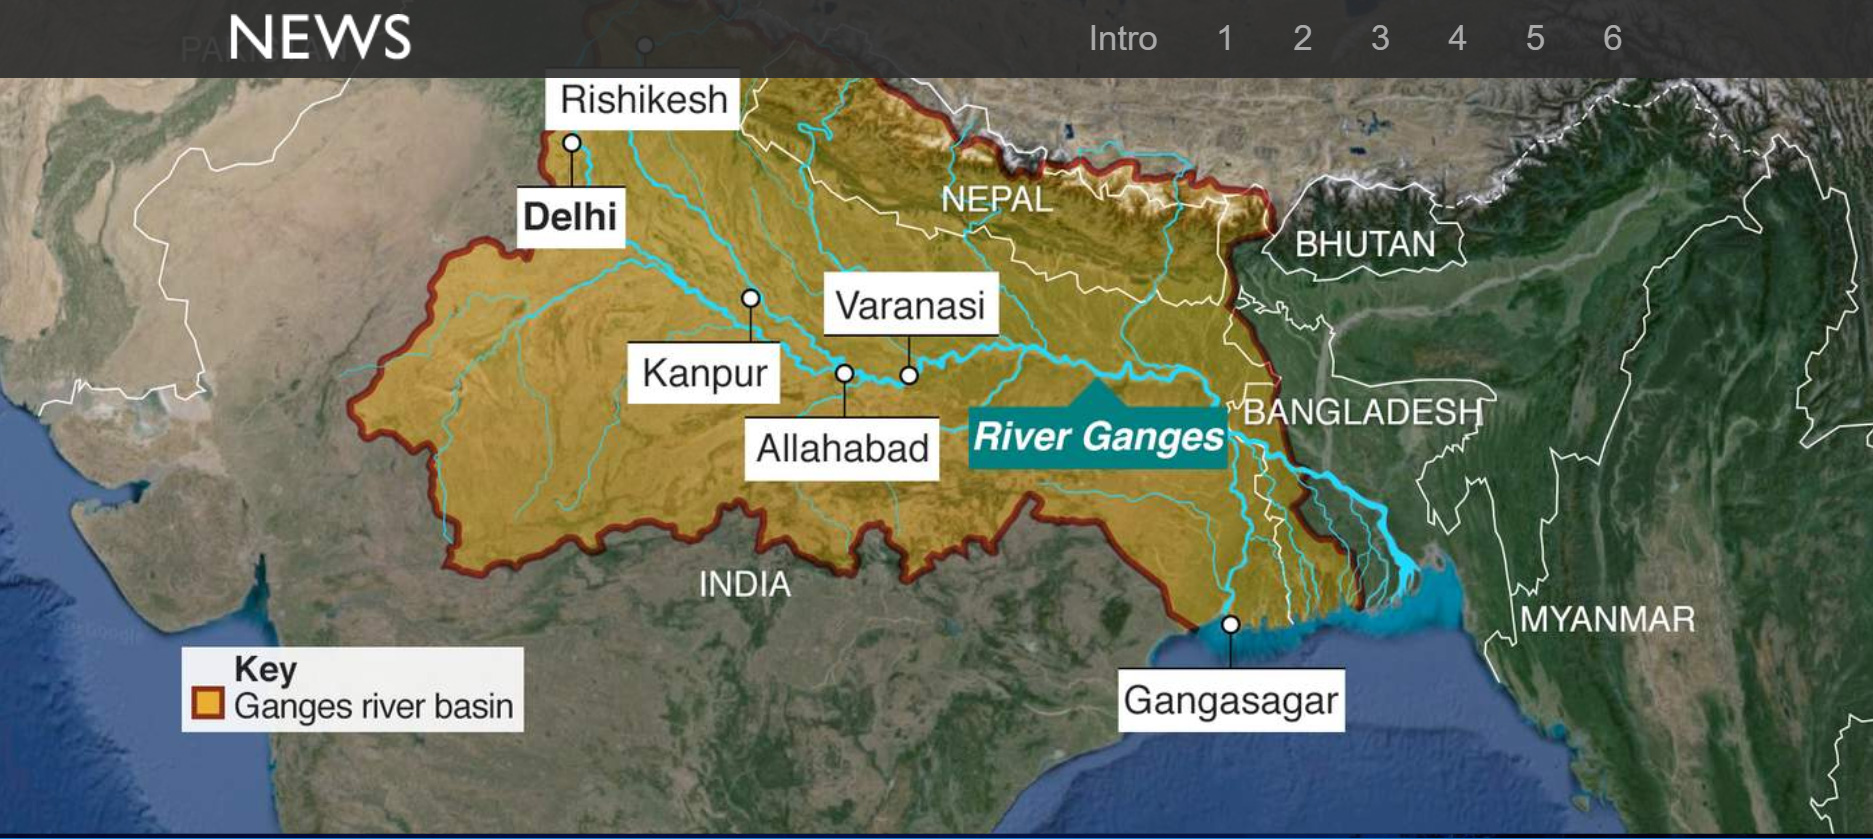 The River Ganges. Credit BBC News. The source of the Ganges lies among the soaring, snow-clad peaks of the Himalayas. https://www.bbc.co.uk/news/resources/idt-aad46fca-734a-45f9-8721-61404cc12a39